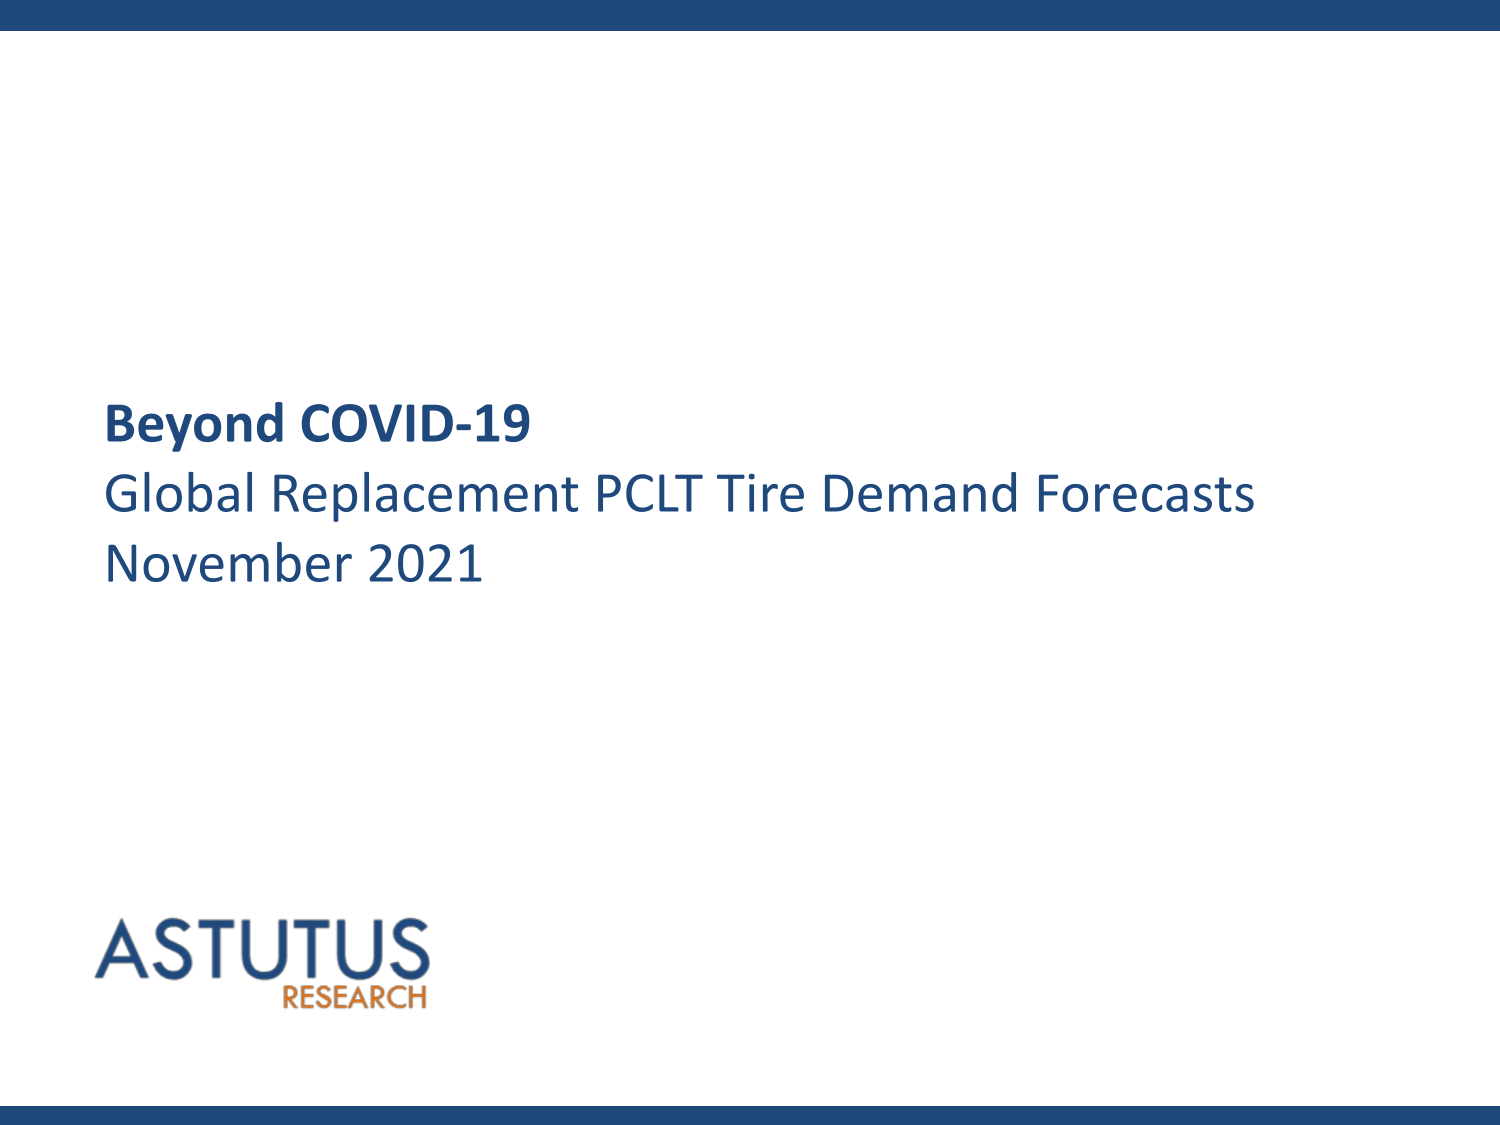 Beyond Covid-19 - Global Replacement PCLT Tire Market Forecasts to 2025